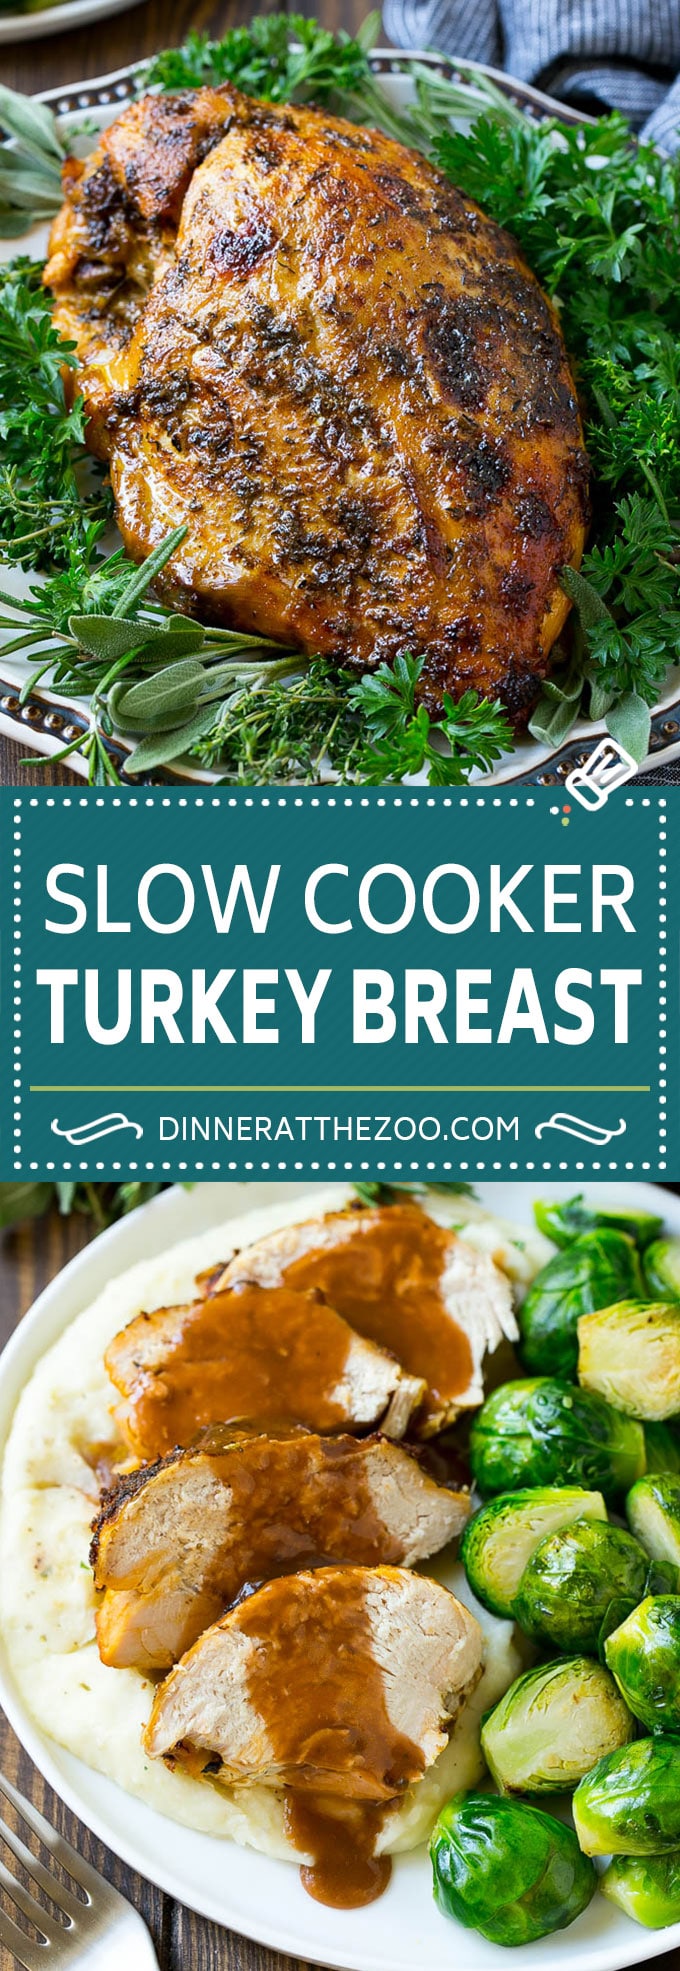 Slow Cooker Turkey Breast Dinner At The Zoo